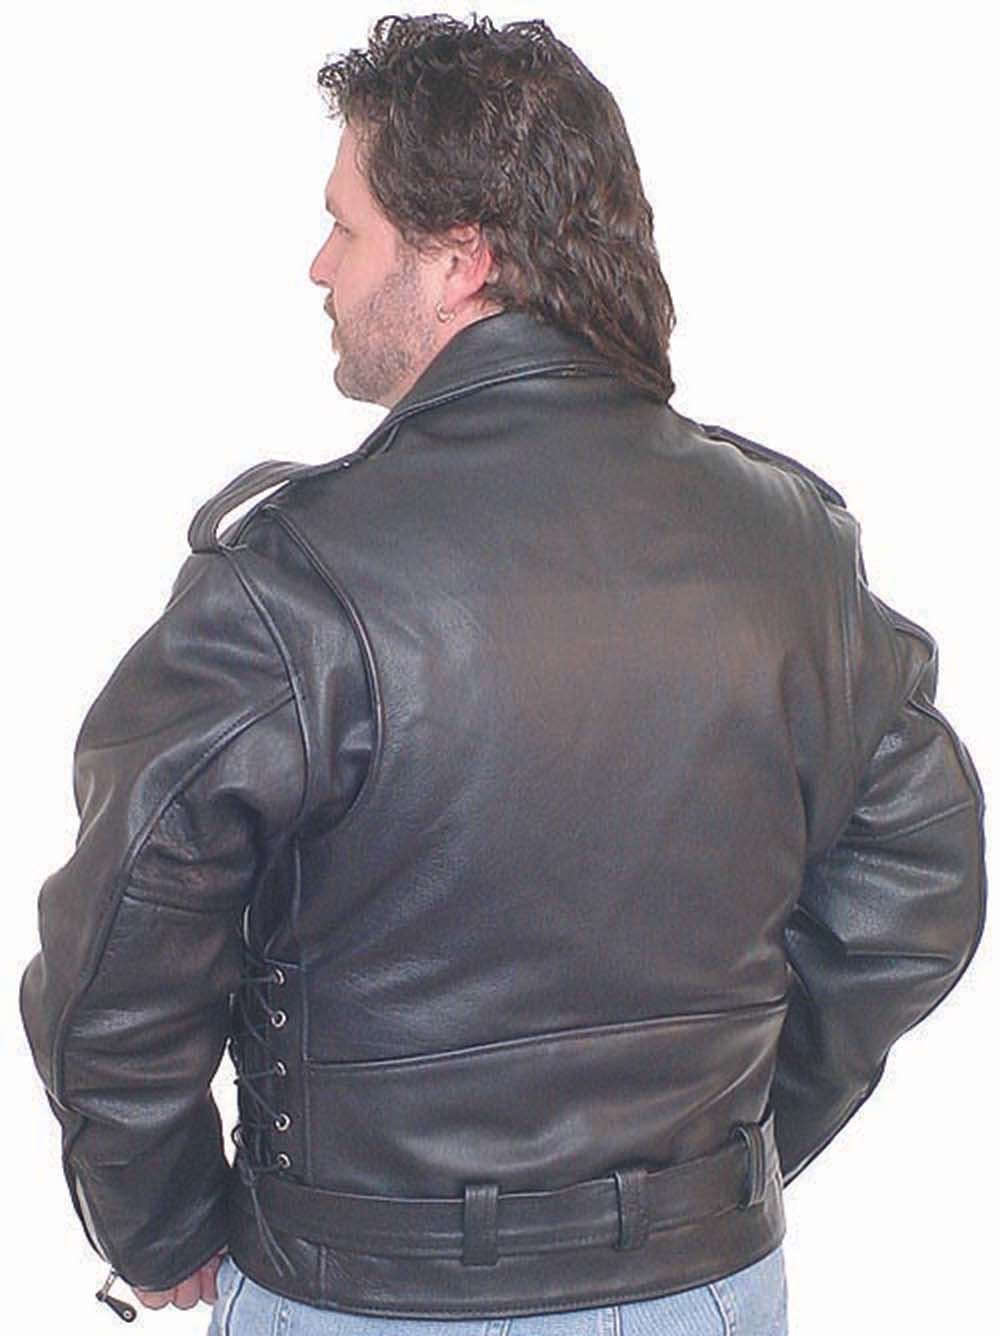 Big & Tall Leather Apparel ⋆ Jamin Leather™ Brands